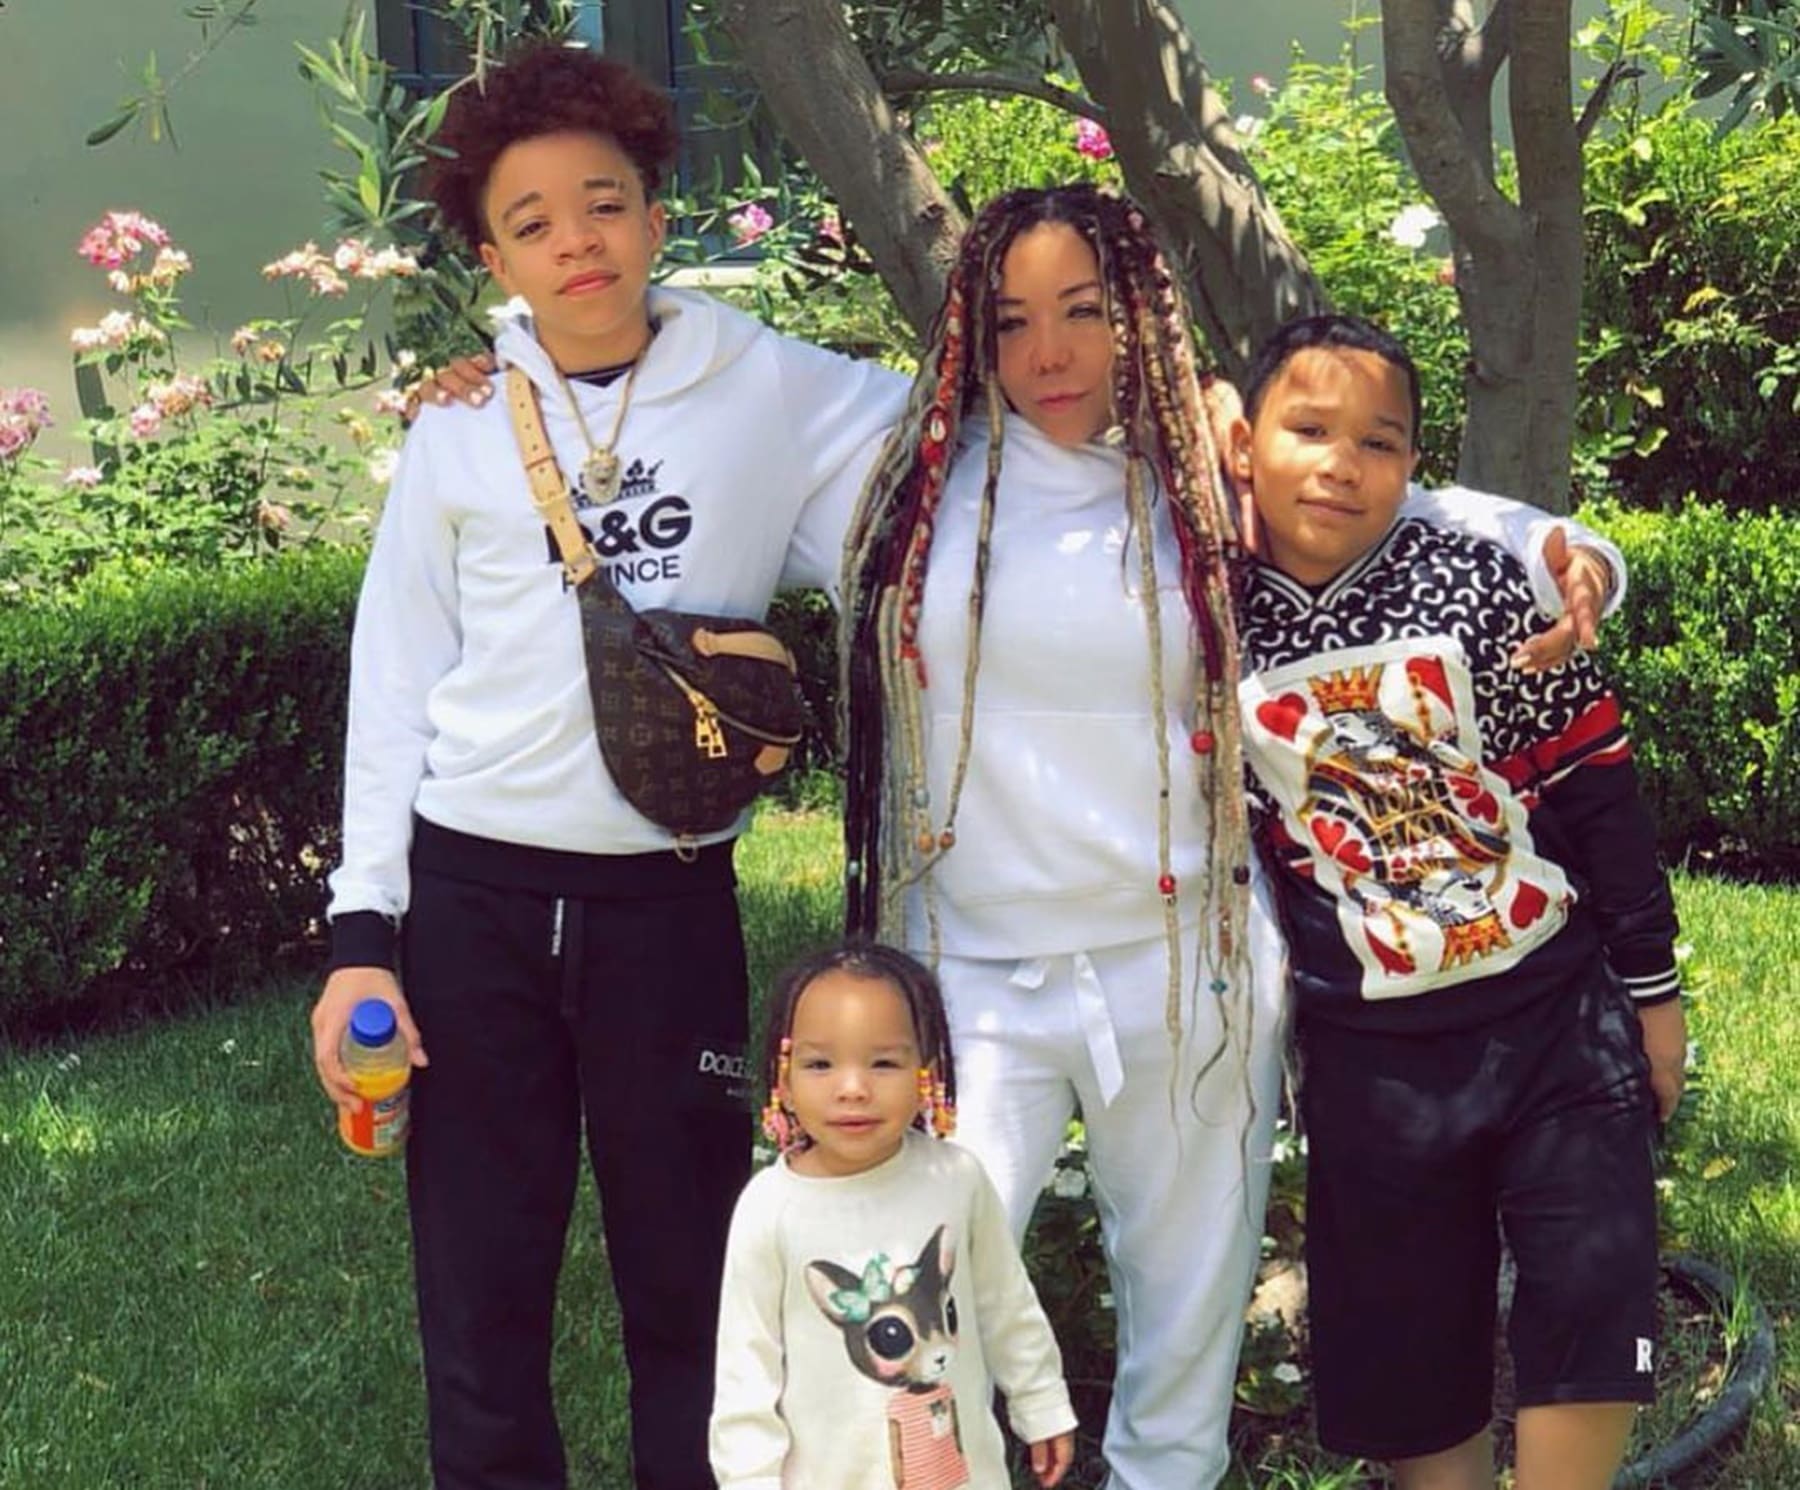 Tiny Harris Proclaims Her Love For Son, King Harris - See Her Emotional Message